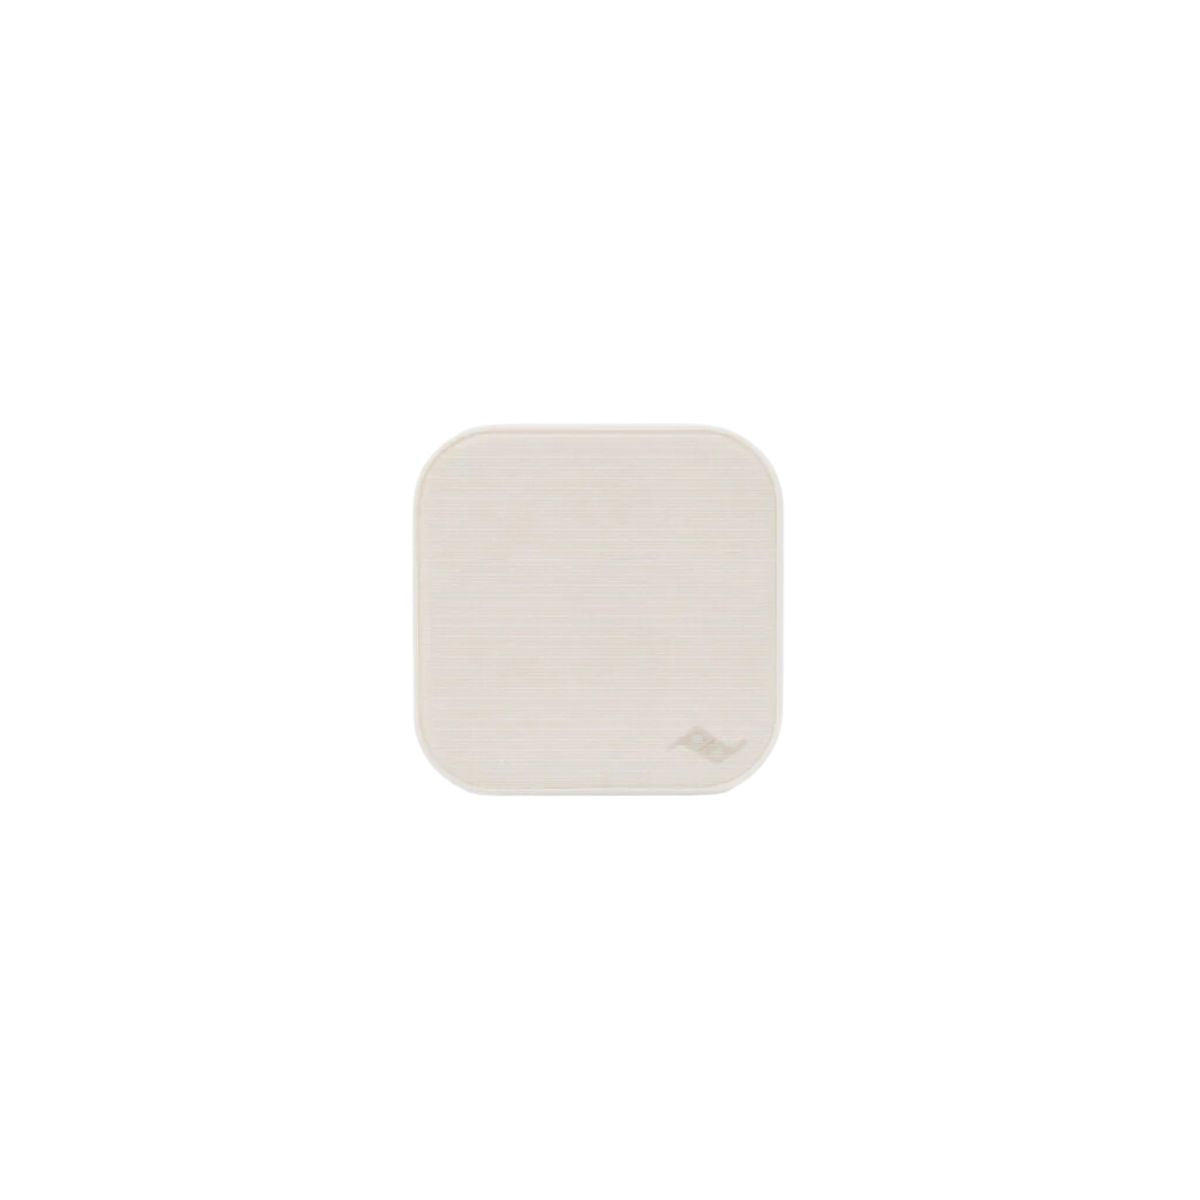 Wall Mount for Mobile Phones - Bone White 2